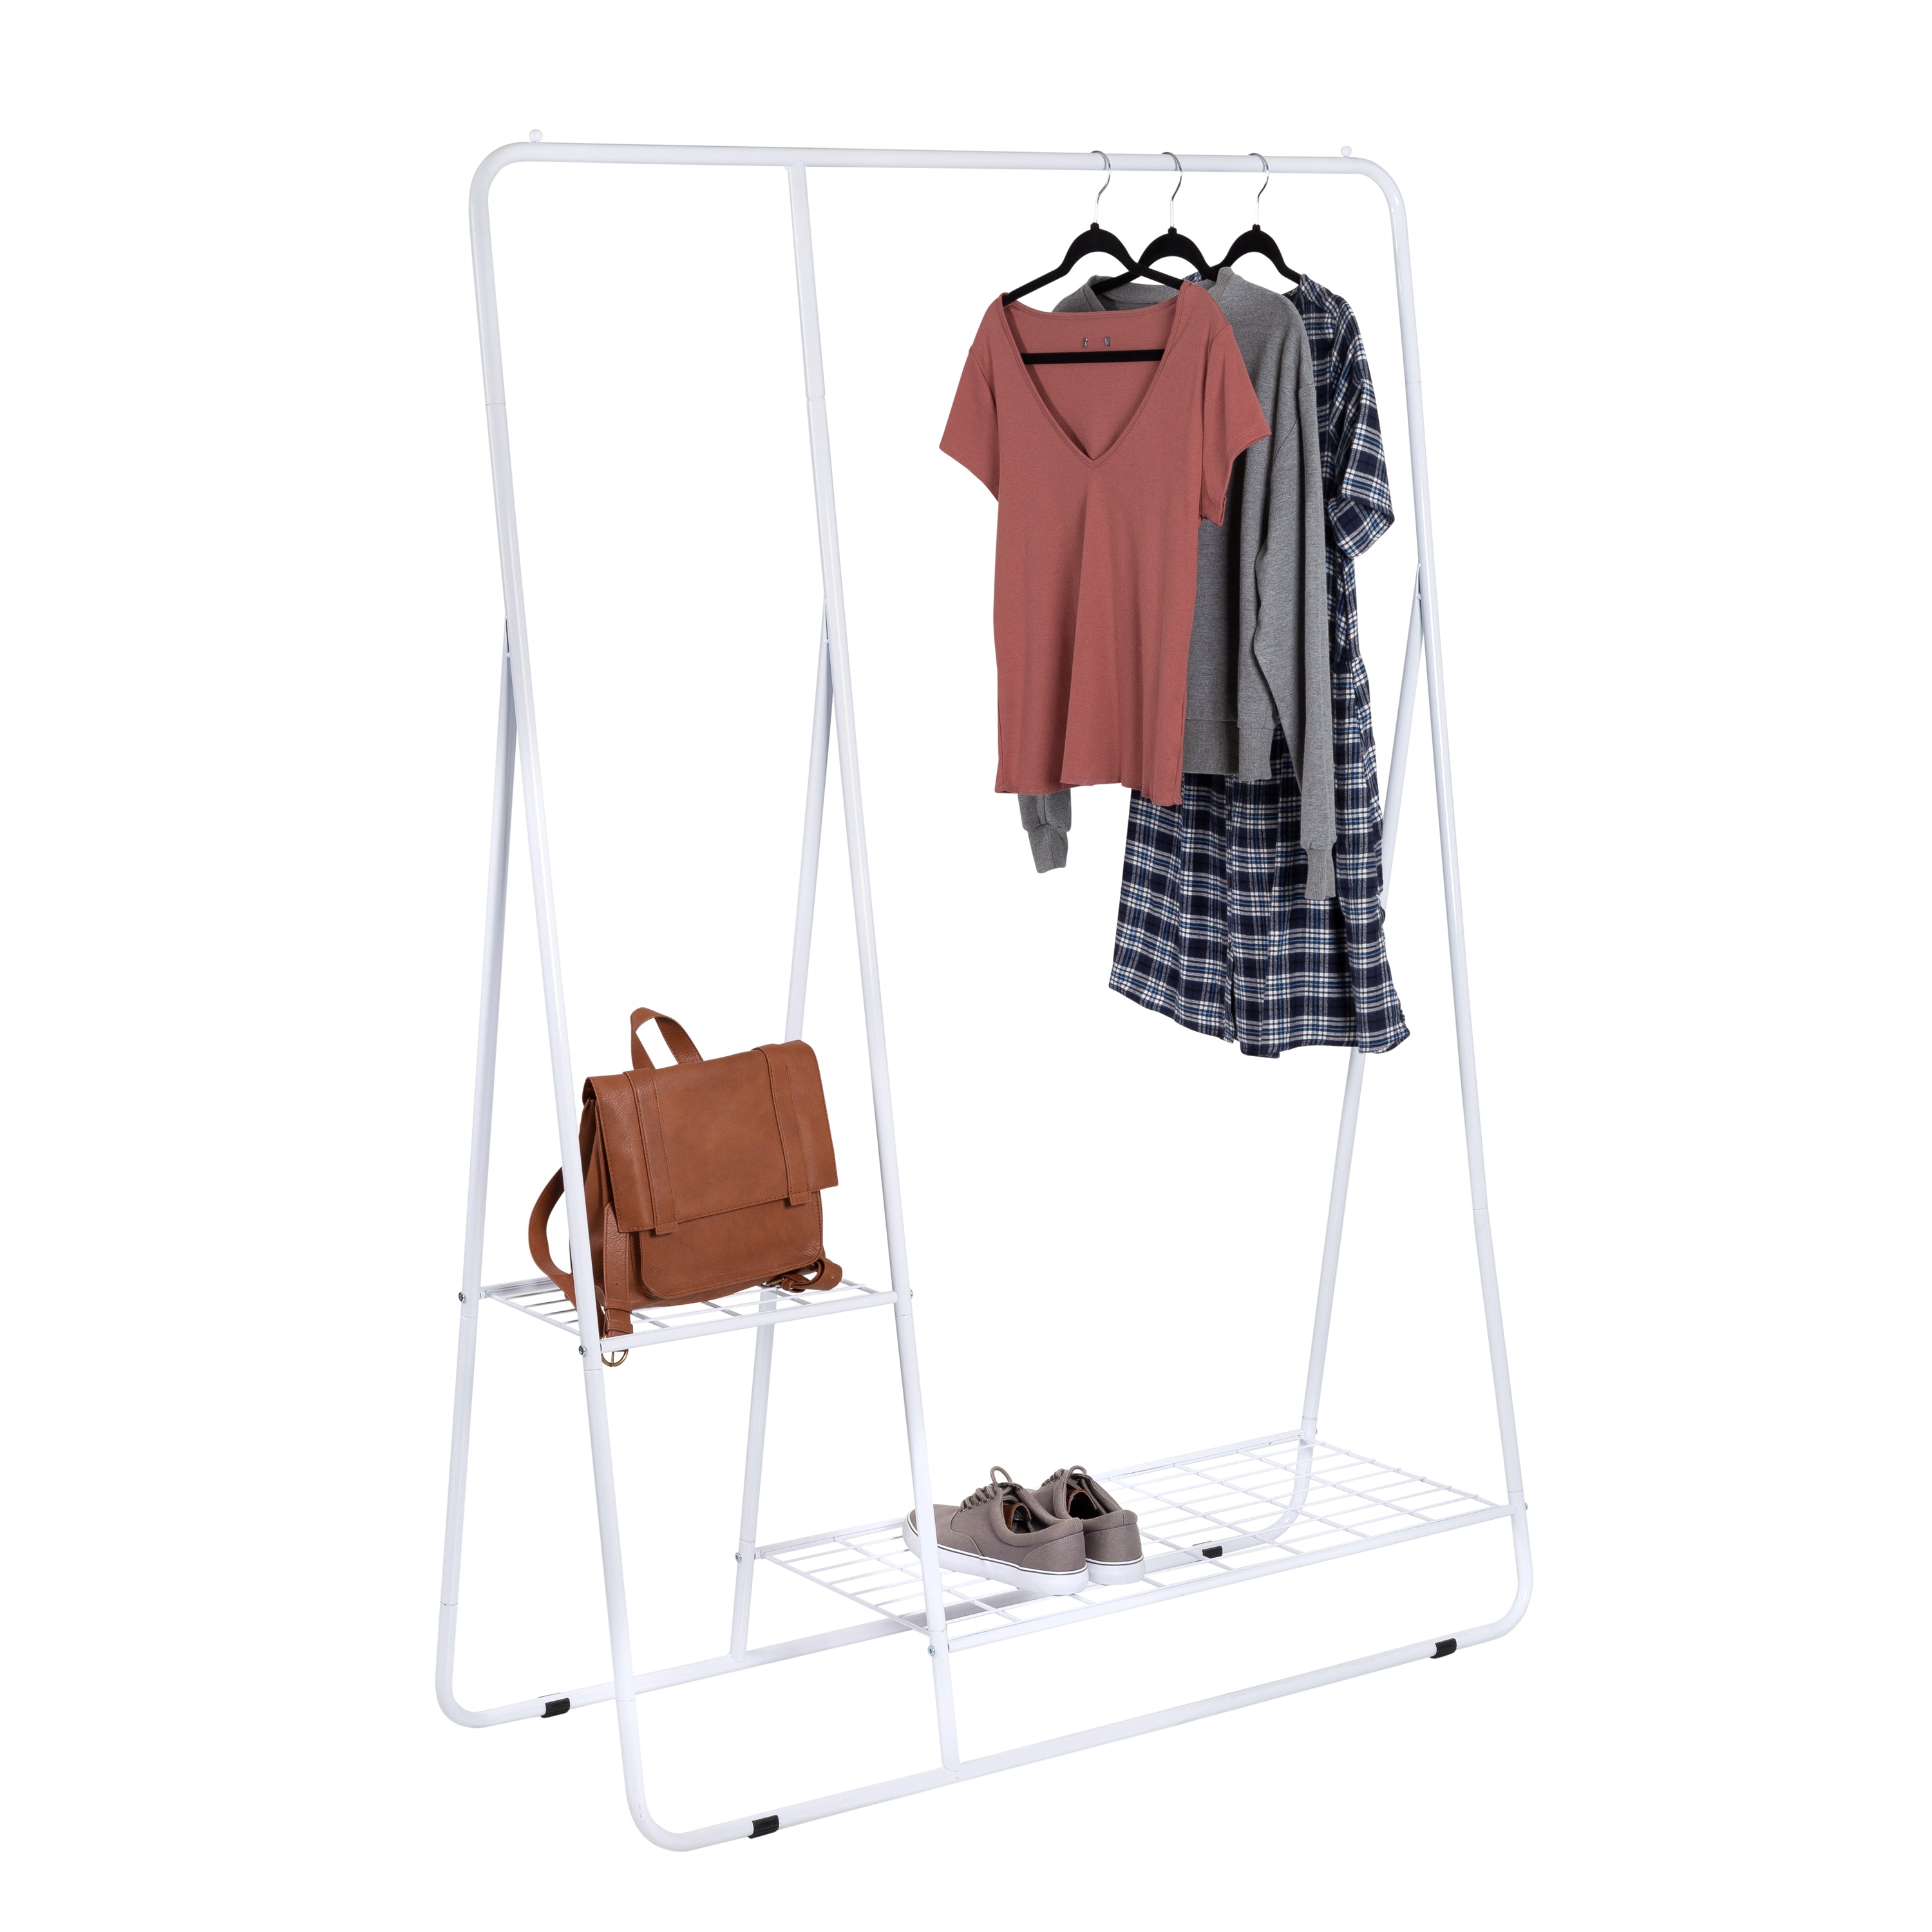 34 Clothes Hanging Ideas  clothing rack, home diy, house design